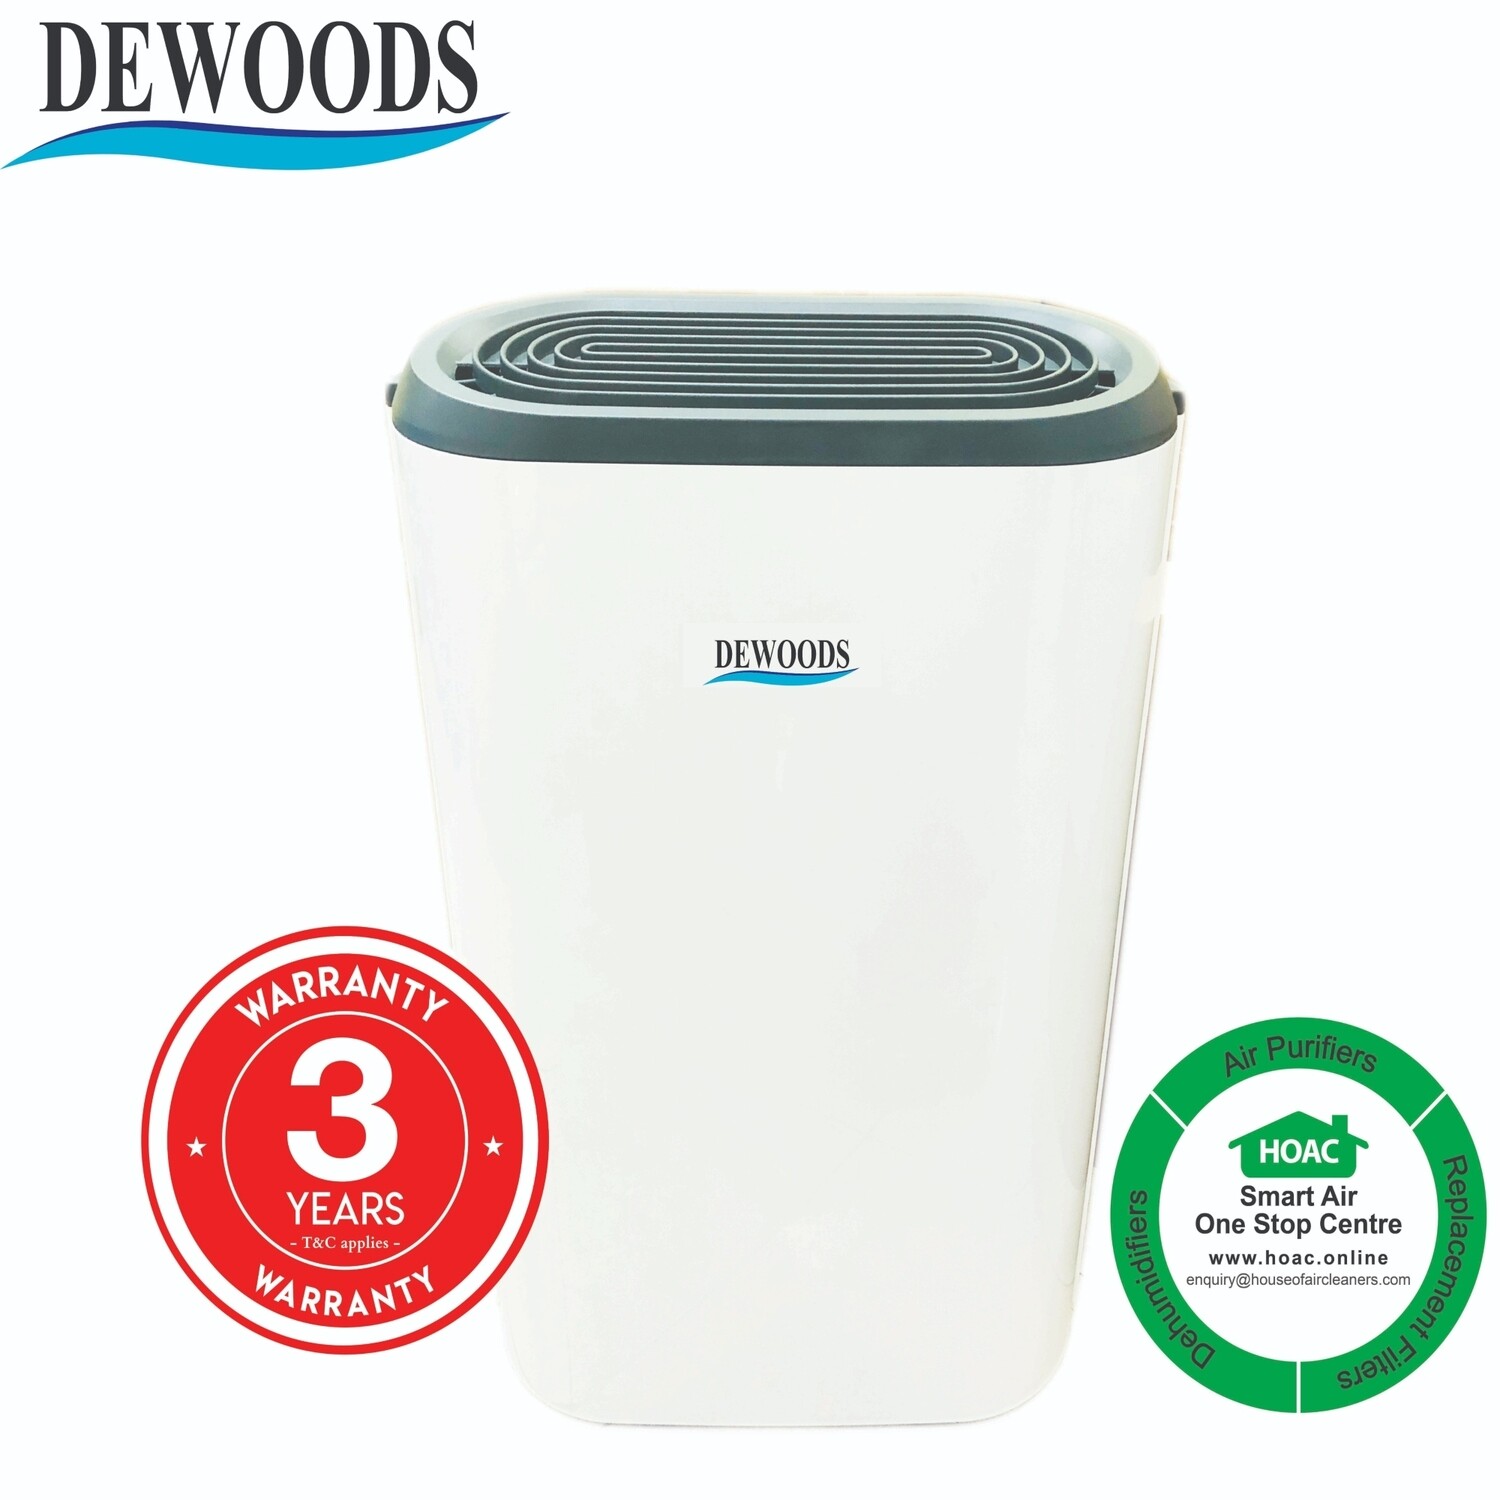 DEWOODS Dehumidifier MDH-12A (12 Litres) With 3 YEARS WARRANTY